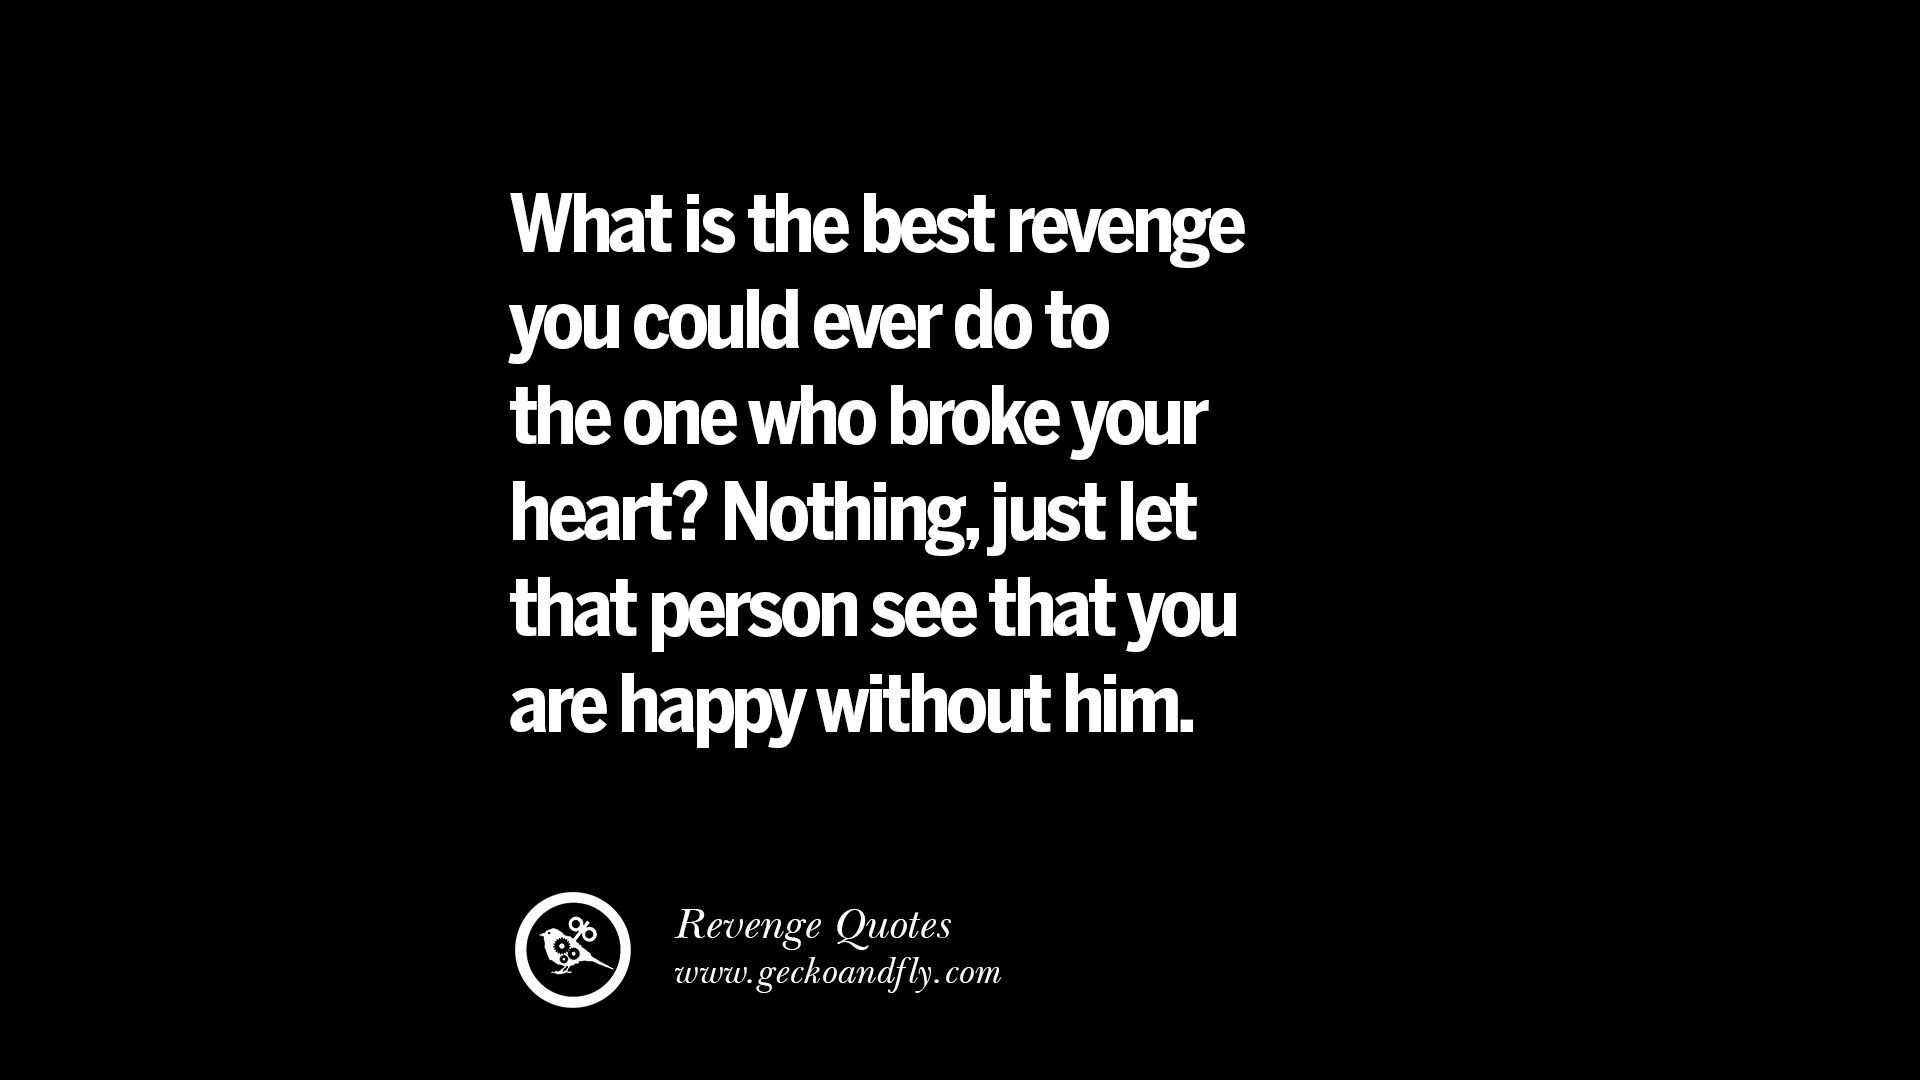 how to take revenge on someone who broke your heart